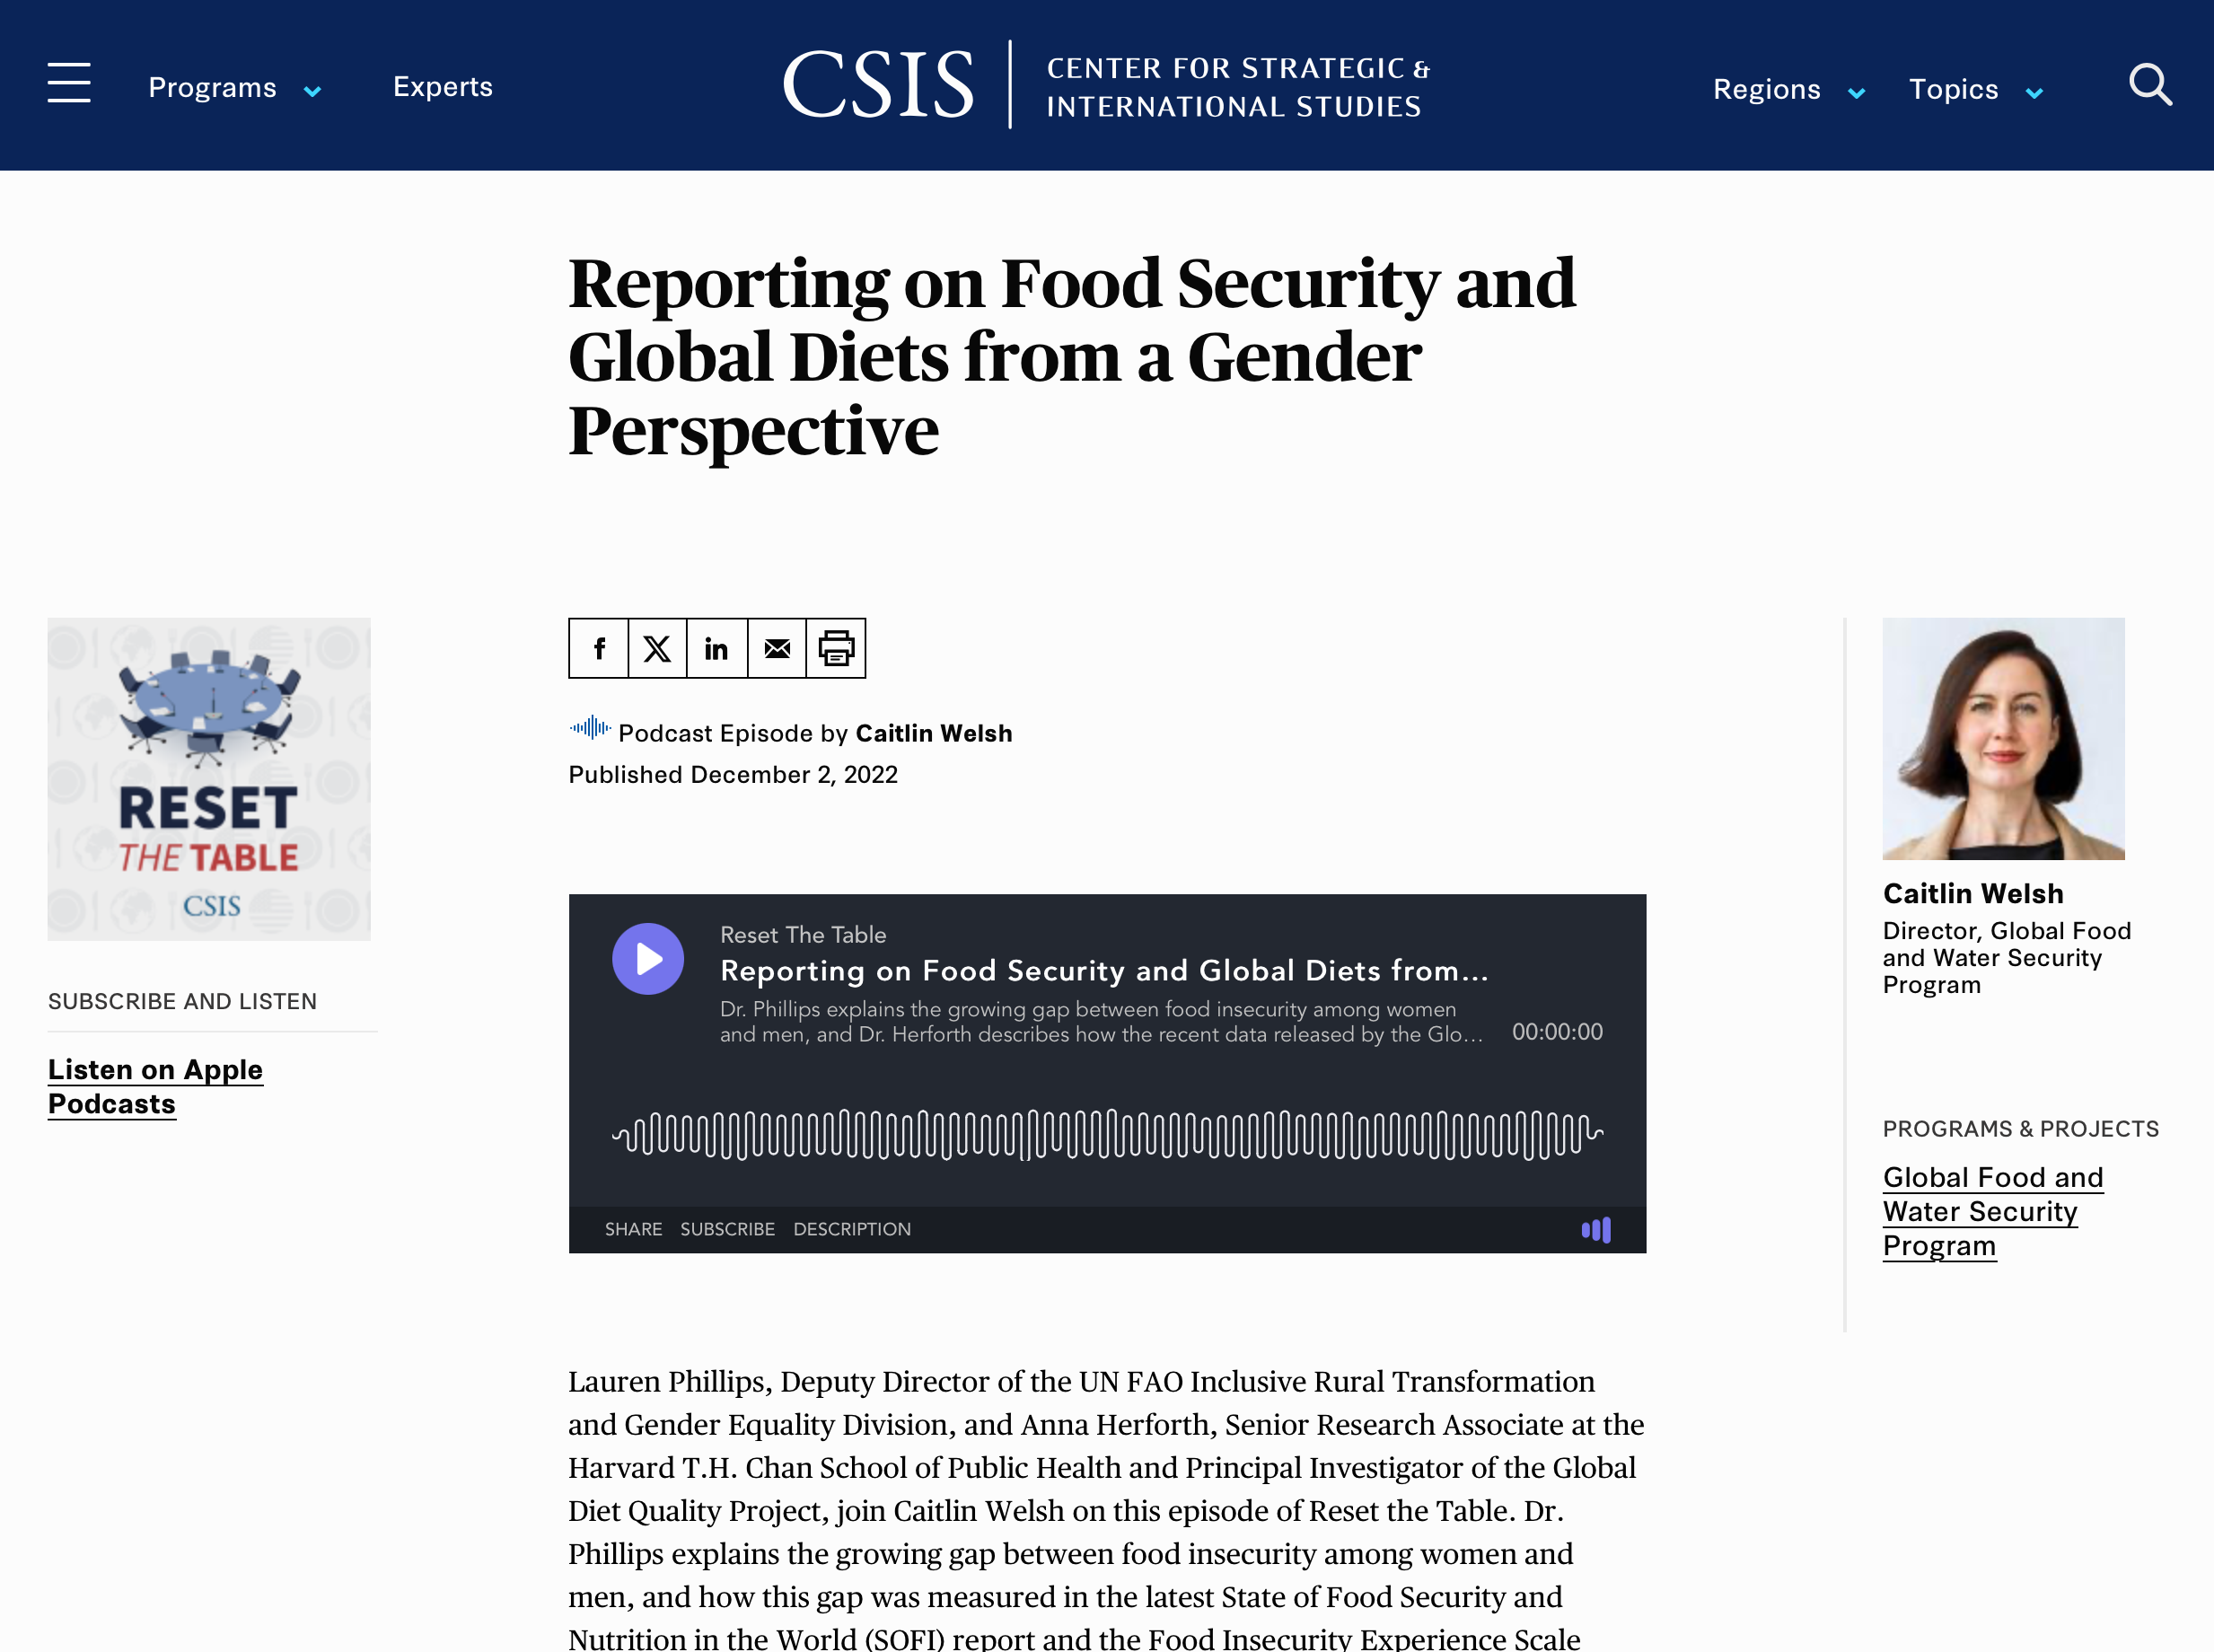 Reporting on Food Security and Global Diets from a Gender Perspective